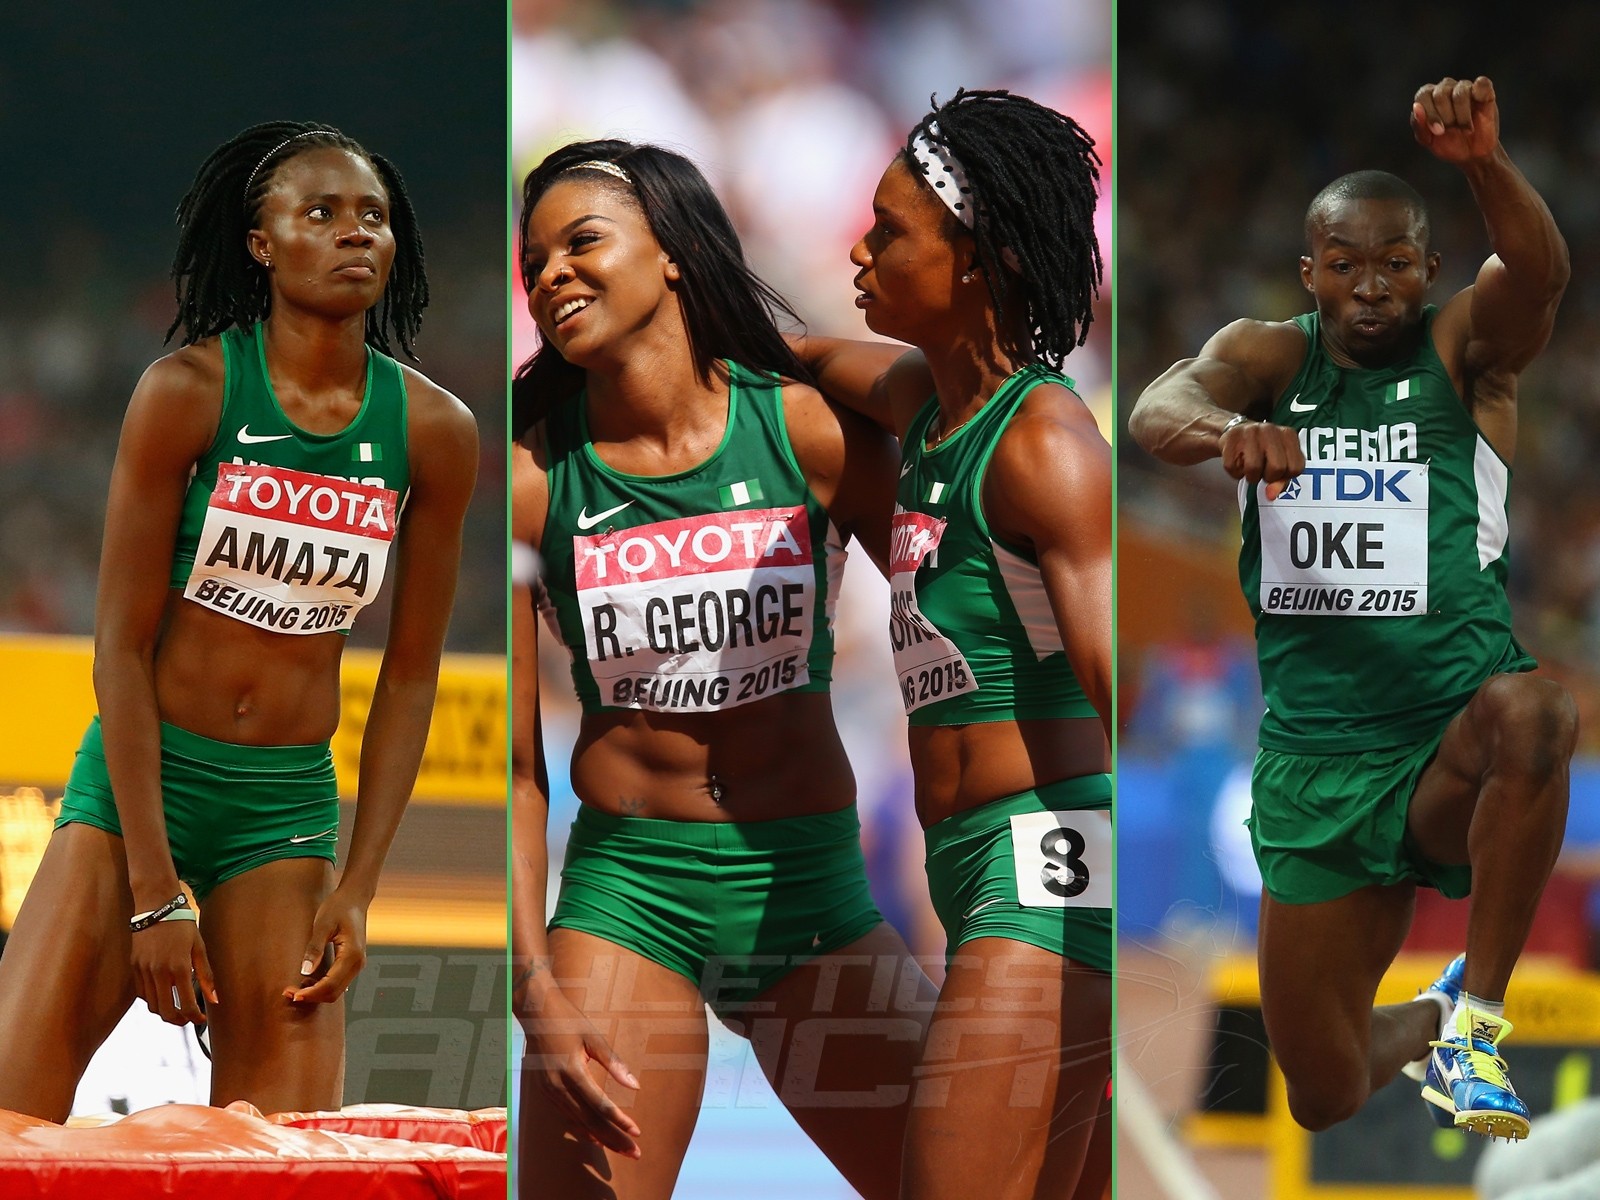 Team Nigeria failed to get any medal at Beijing 2015 - IAAF World Championships